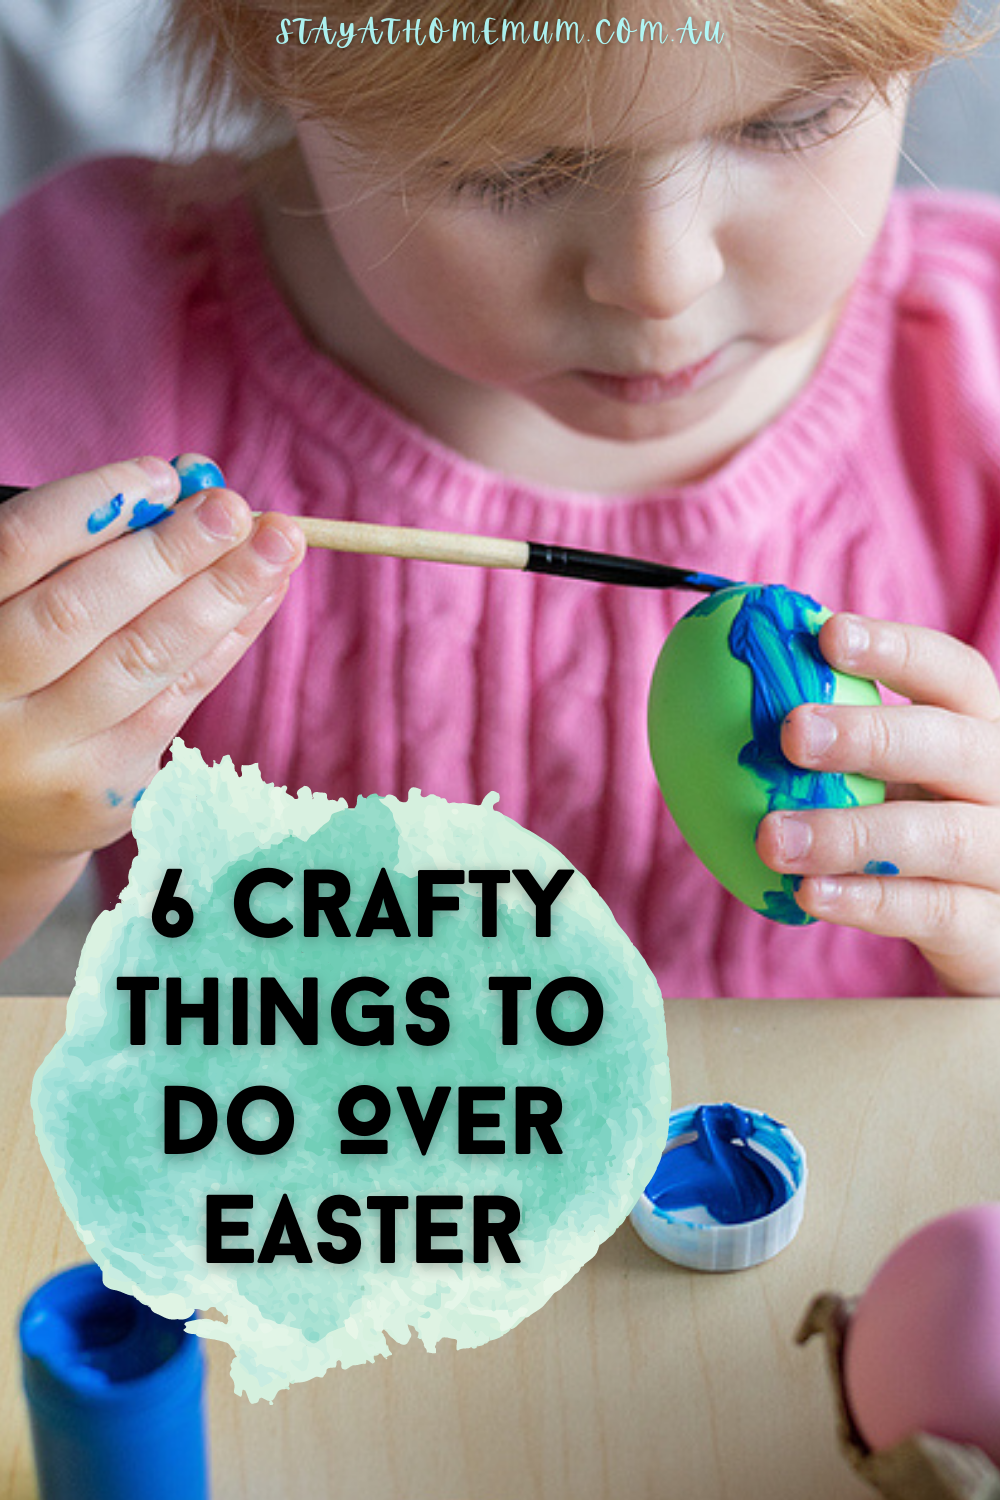 6 Crafty Things To Do Over Easter | Stay At Home Mum